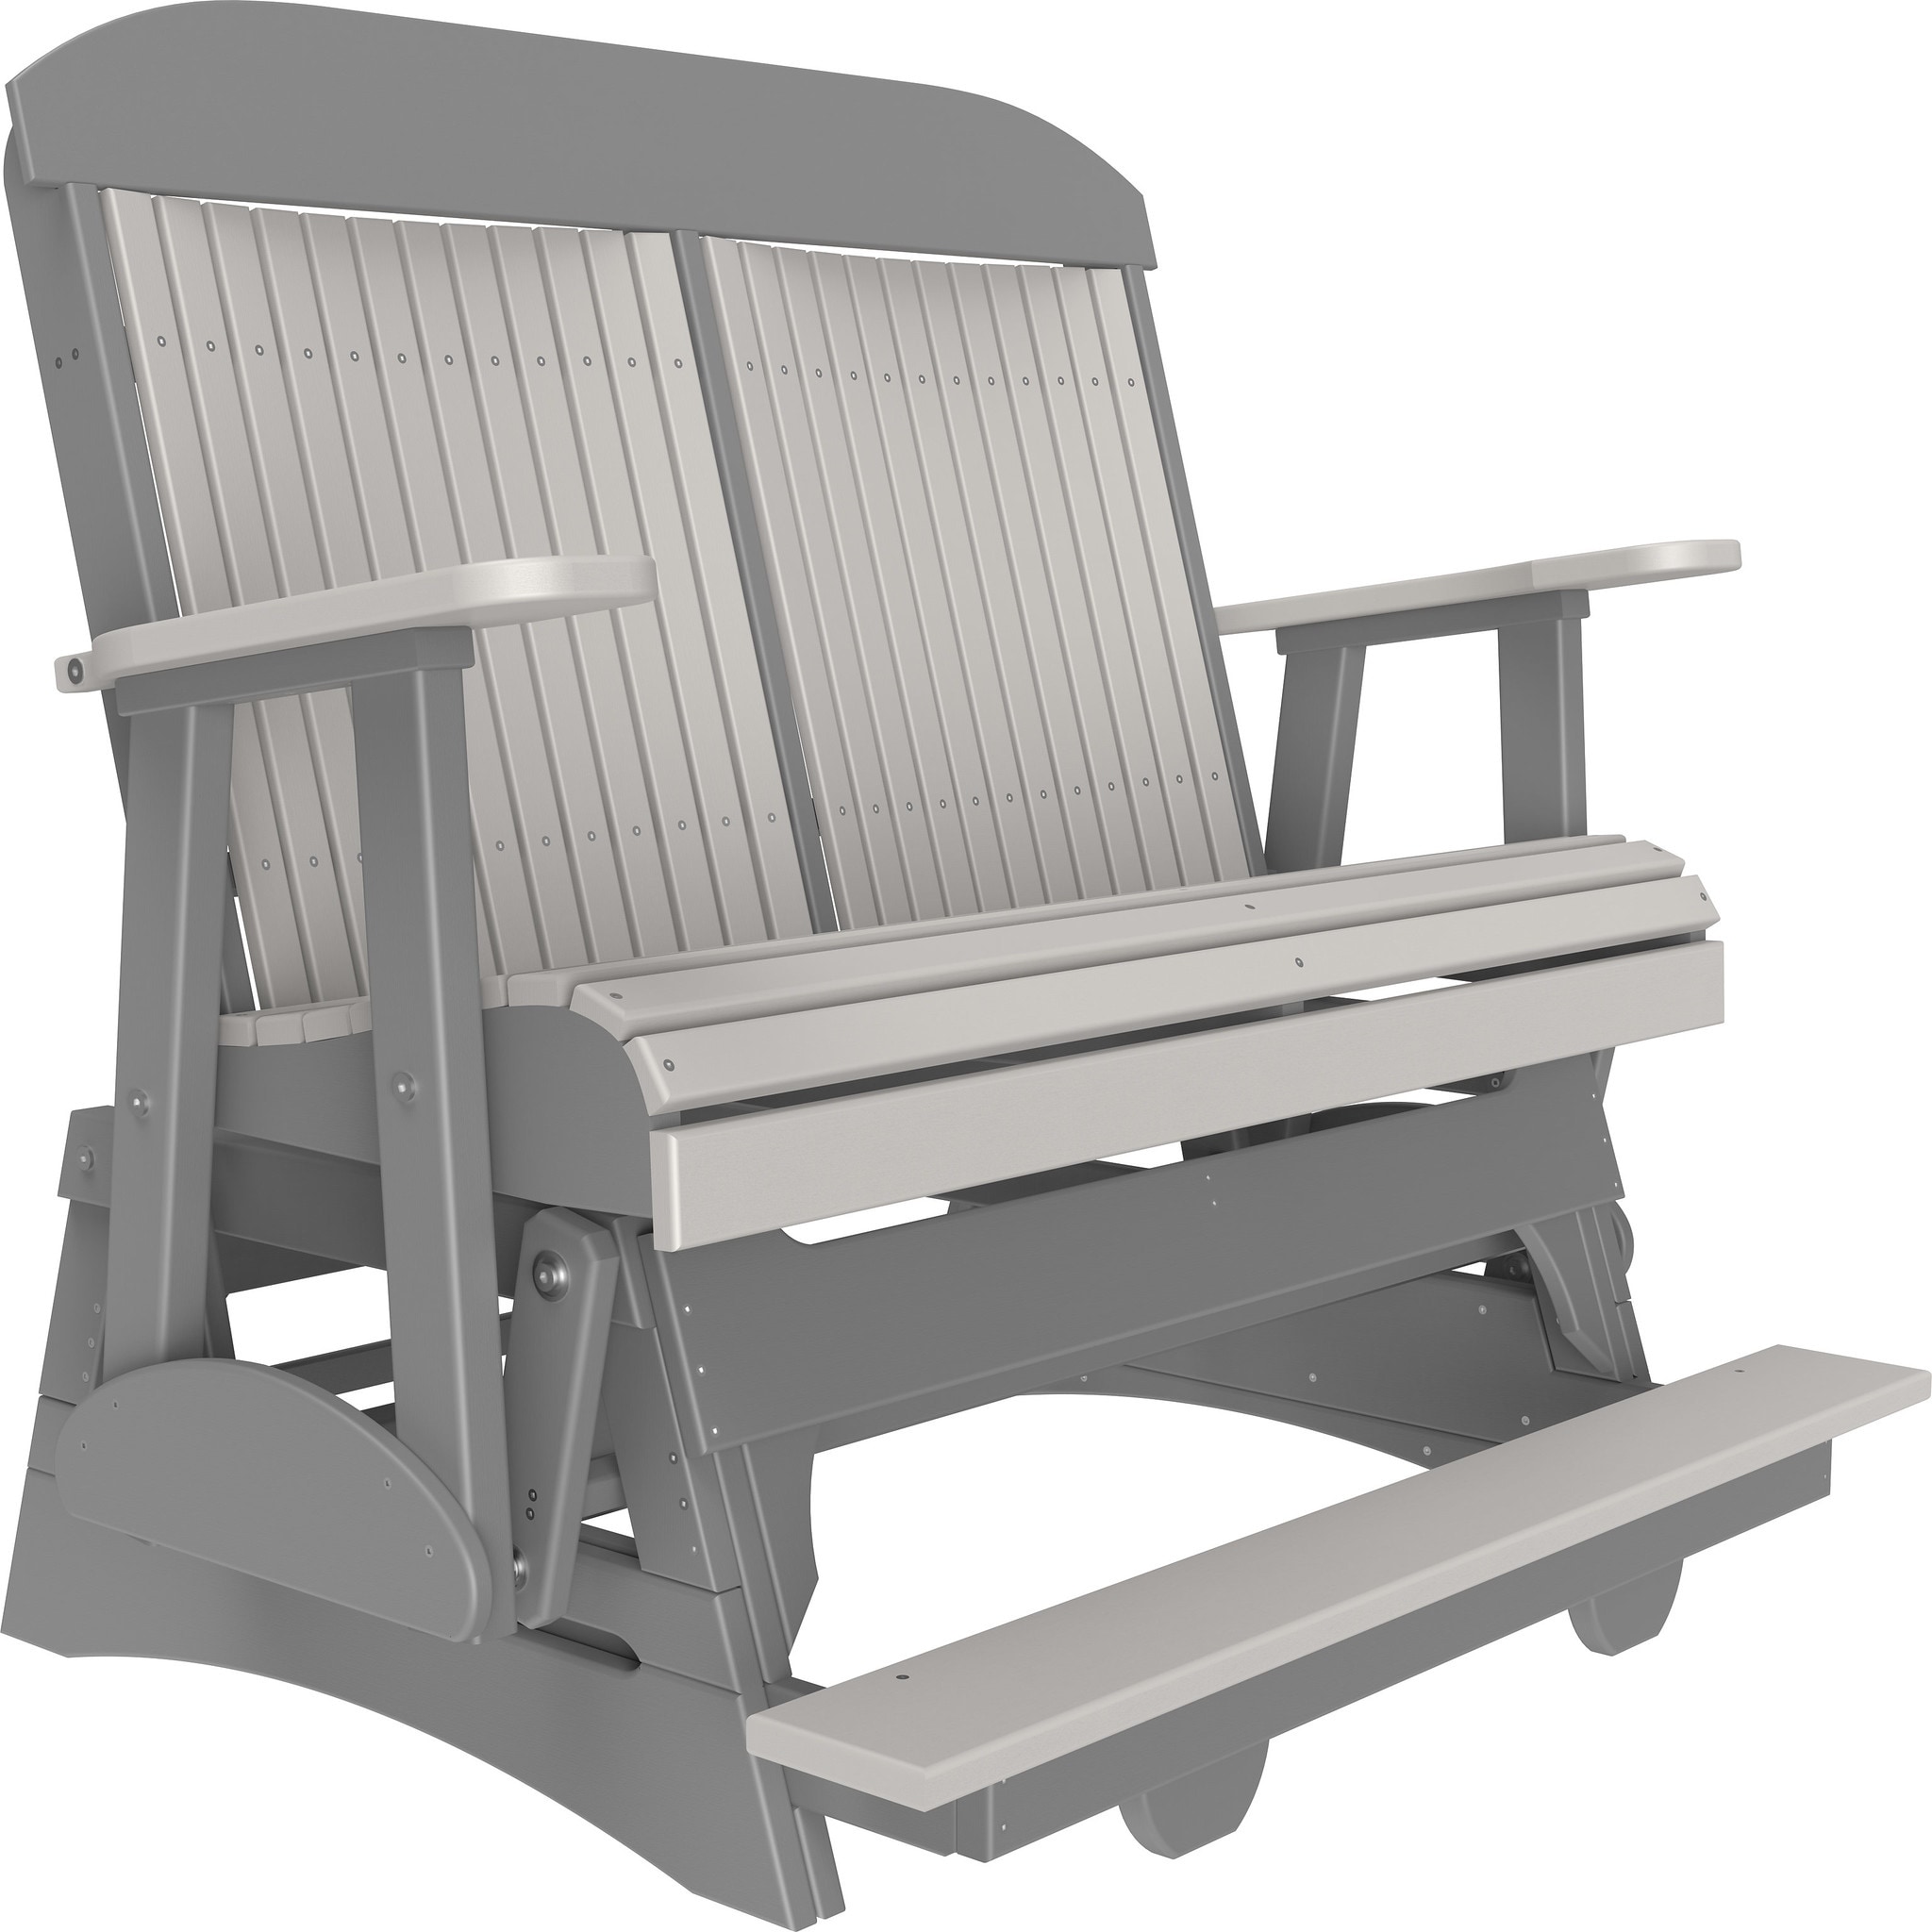 Outdoor All-weather Poly Lumber Glider Chair W/footrest